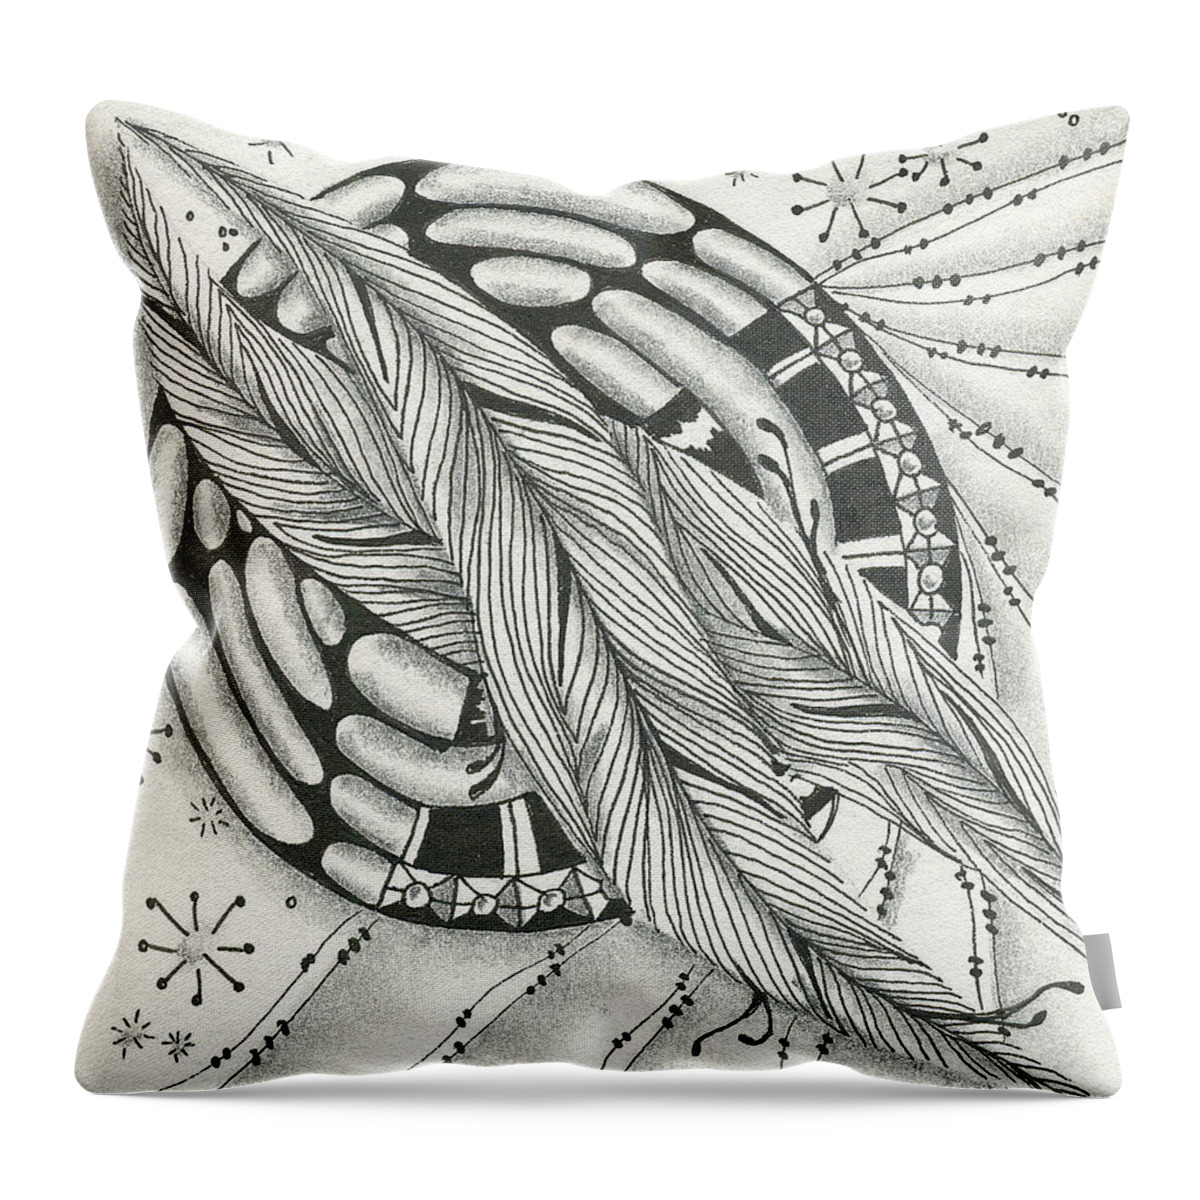 Zentangle Throw Pillow featuring the drawing Into Orbit by Jan Steinle